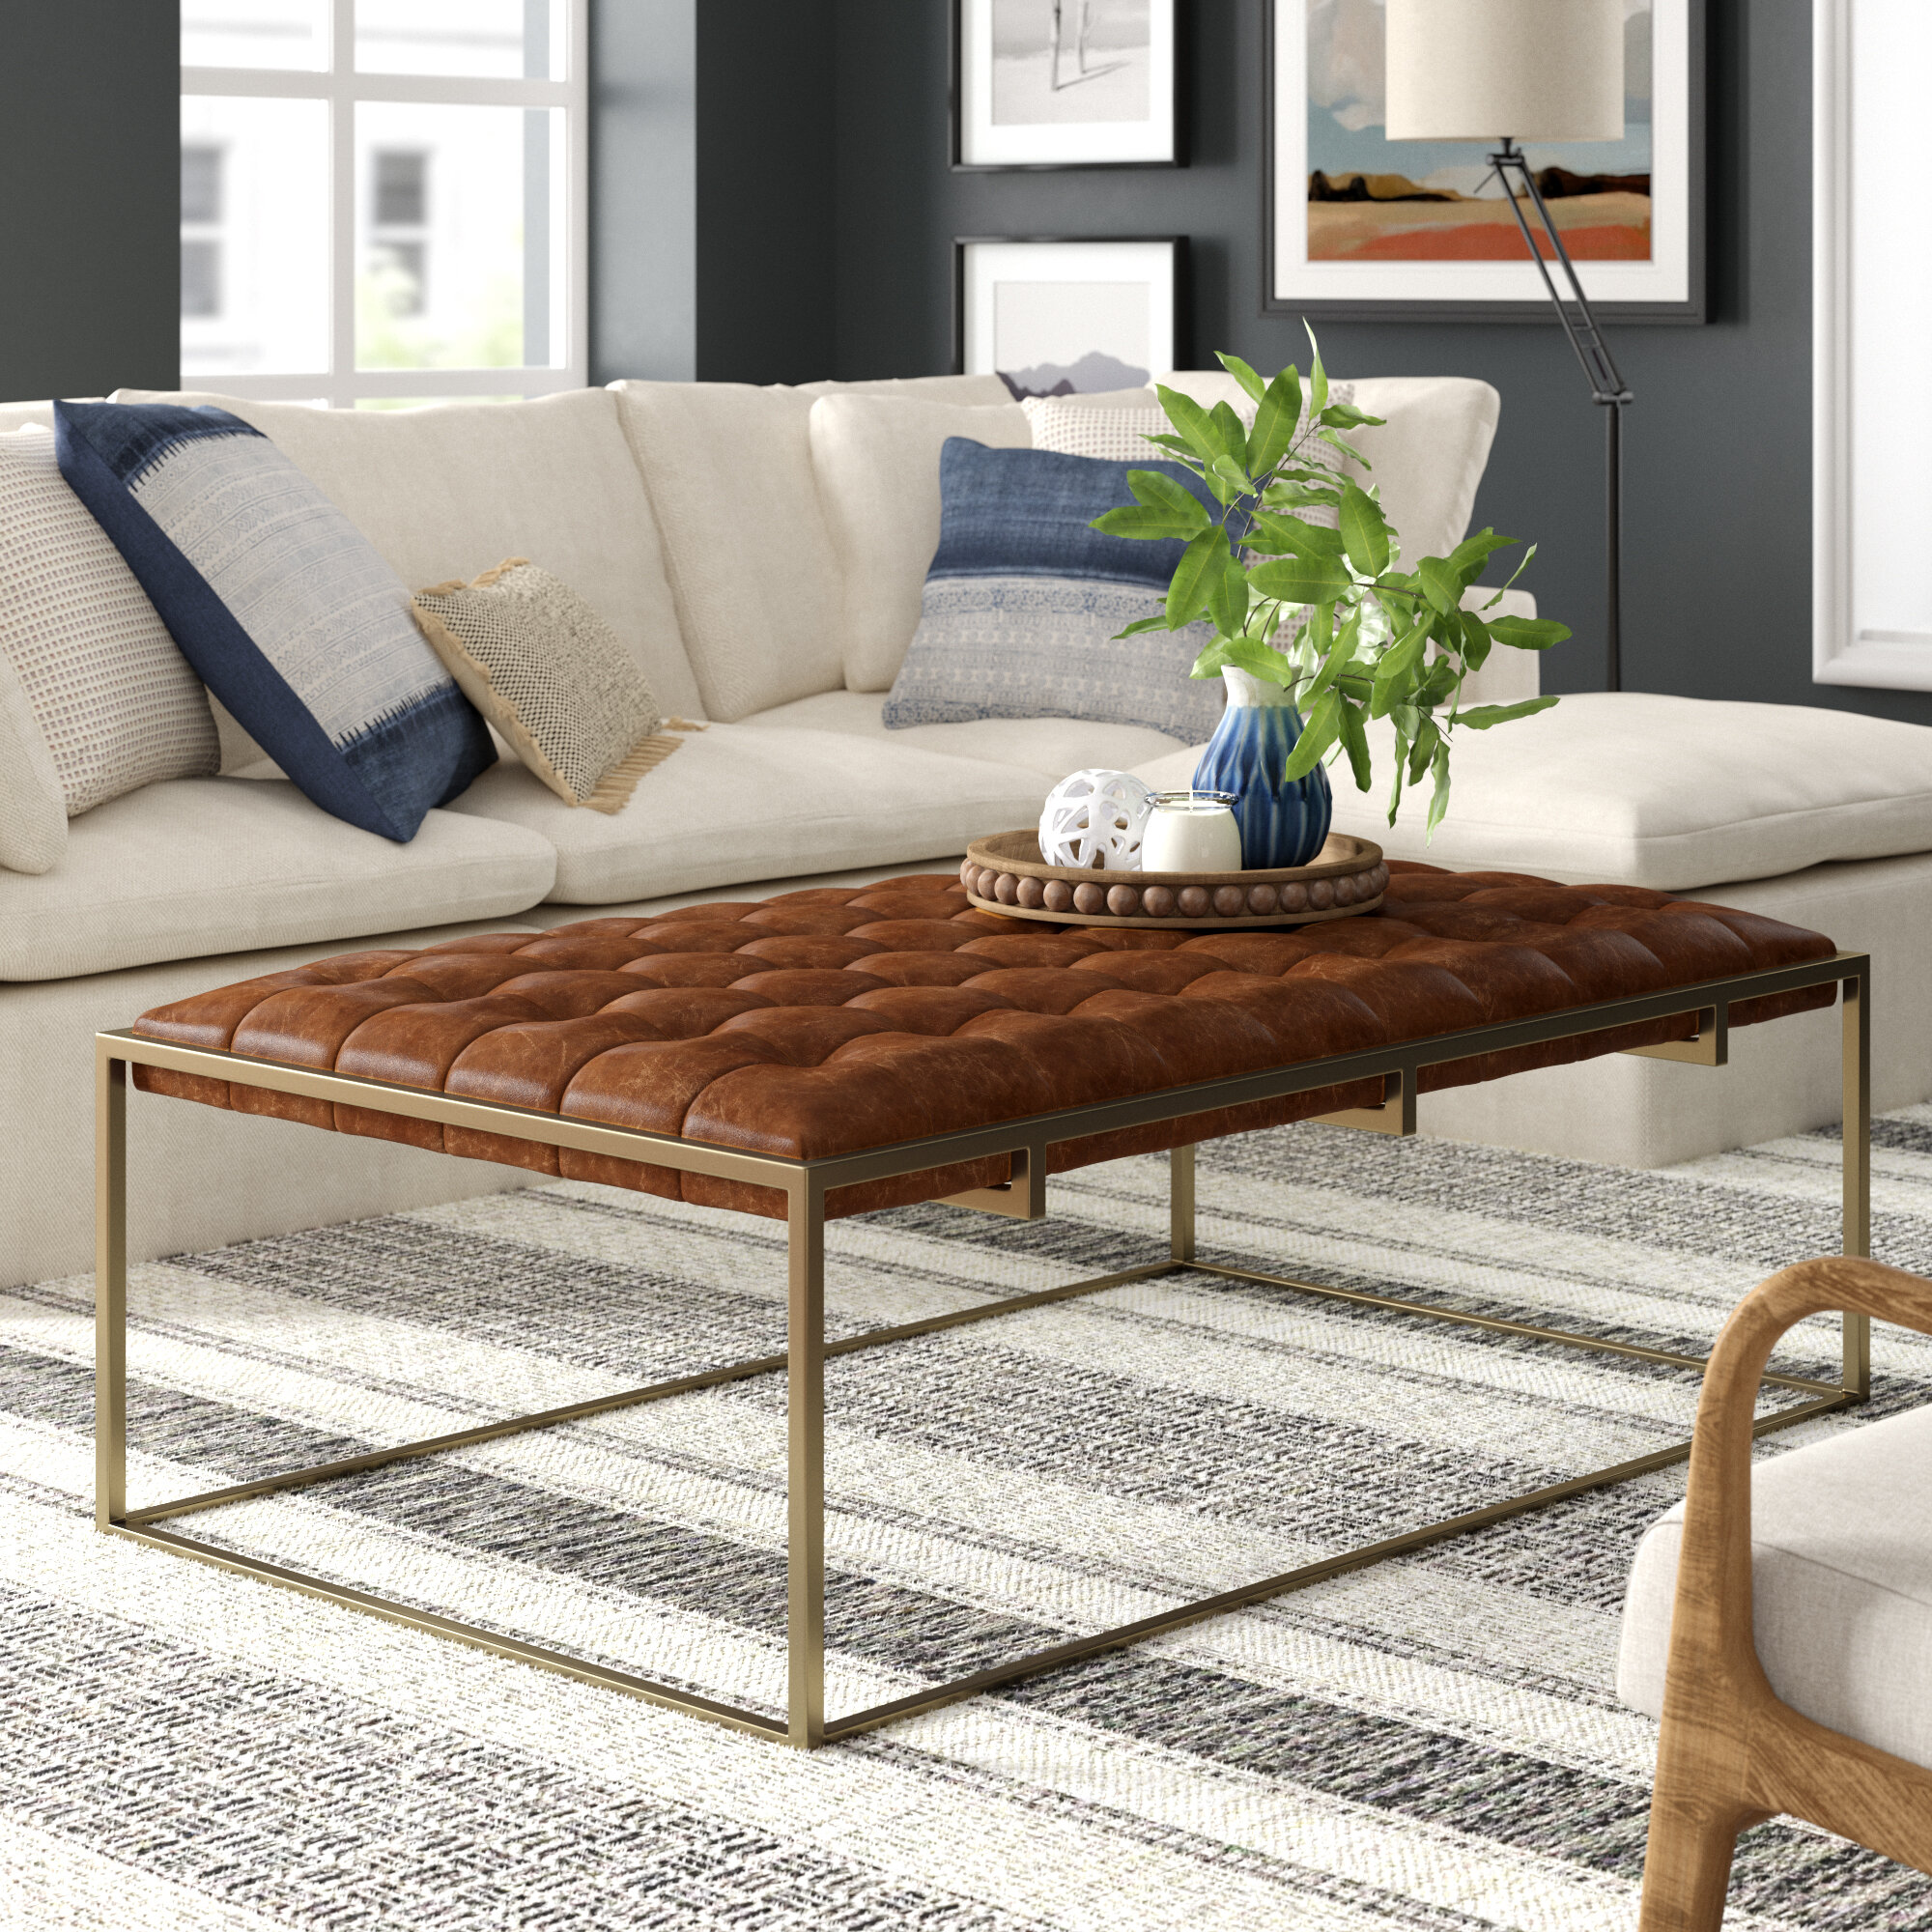 Tufted Coffee Table Rectangle : Square tufted ottoman coffee table